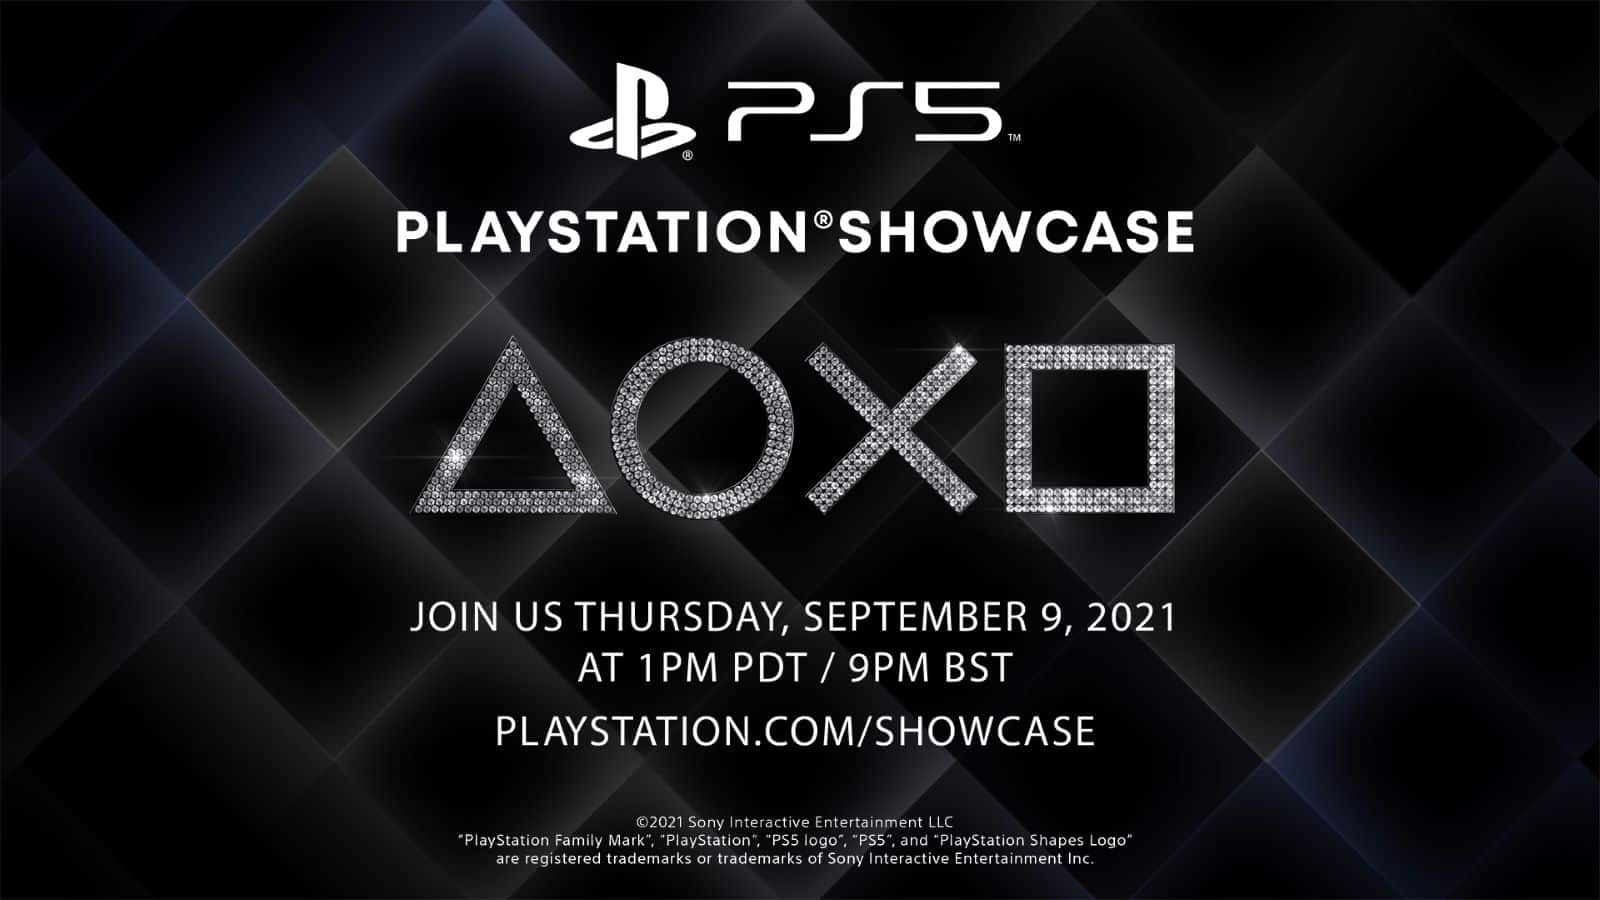 Promotional image from Sony showing the date of the PlayStation showcase, along with diamond-style PlayStation icons